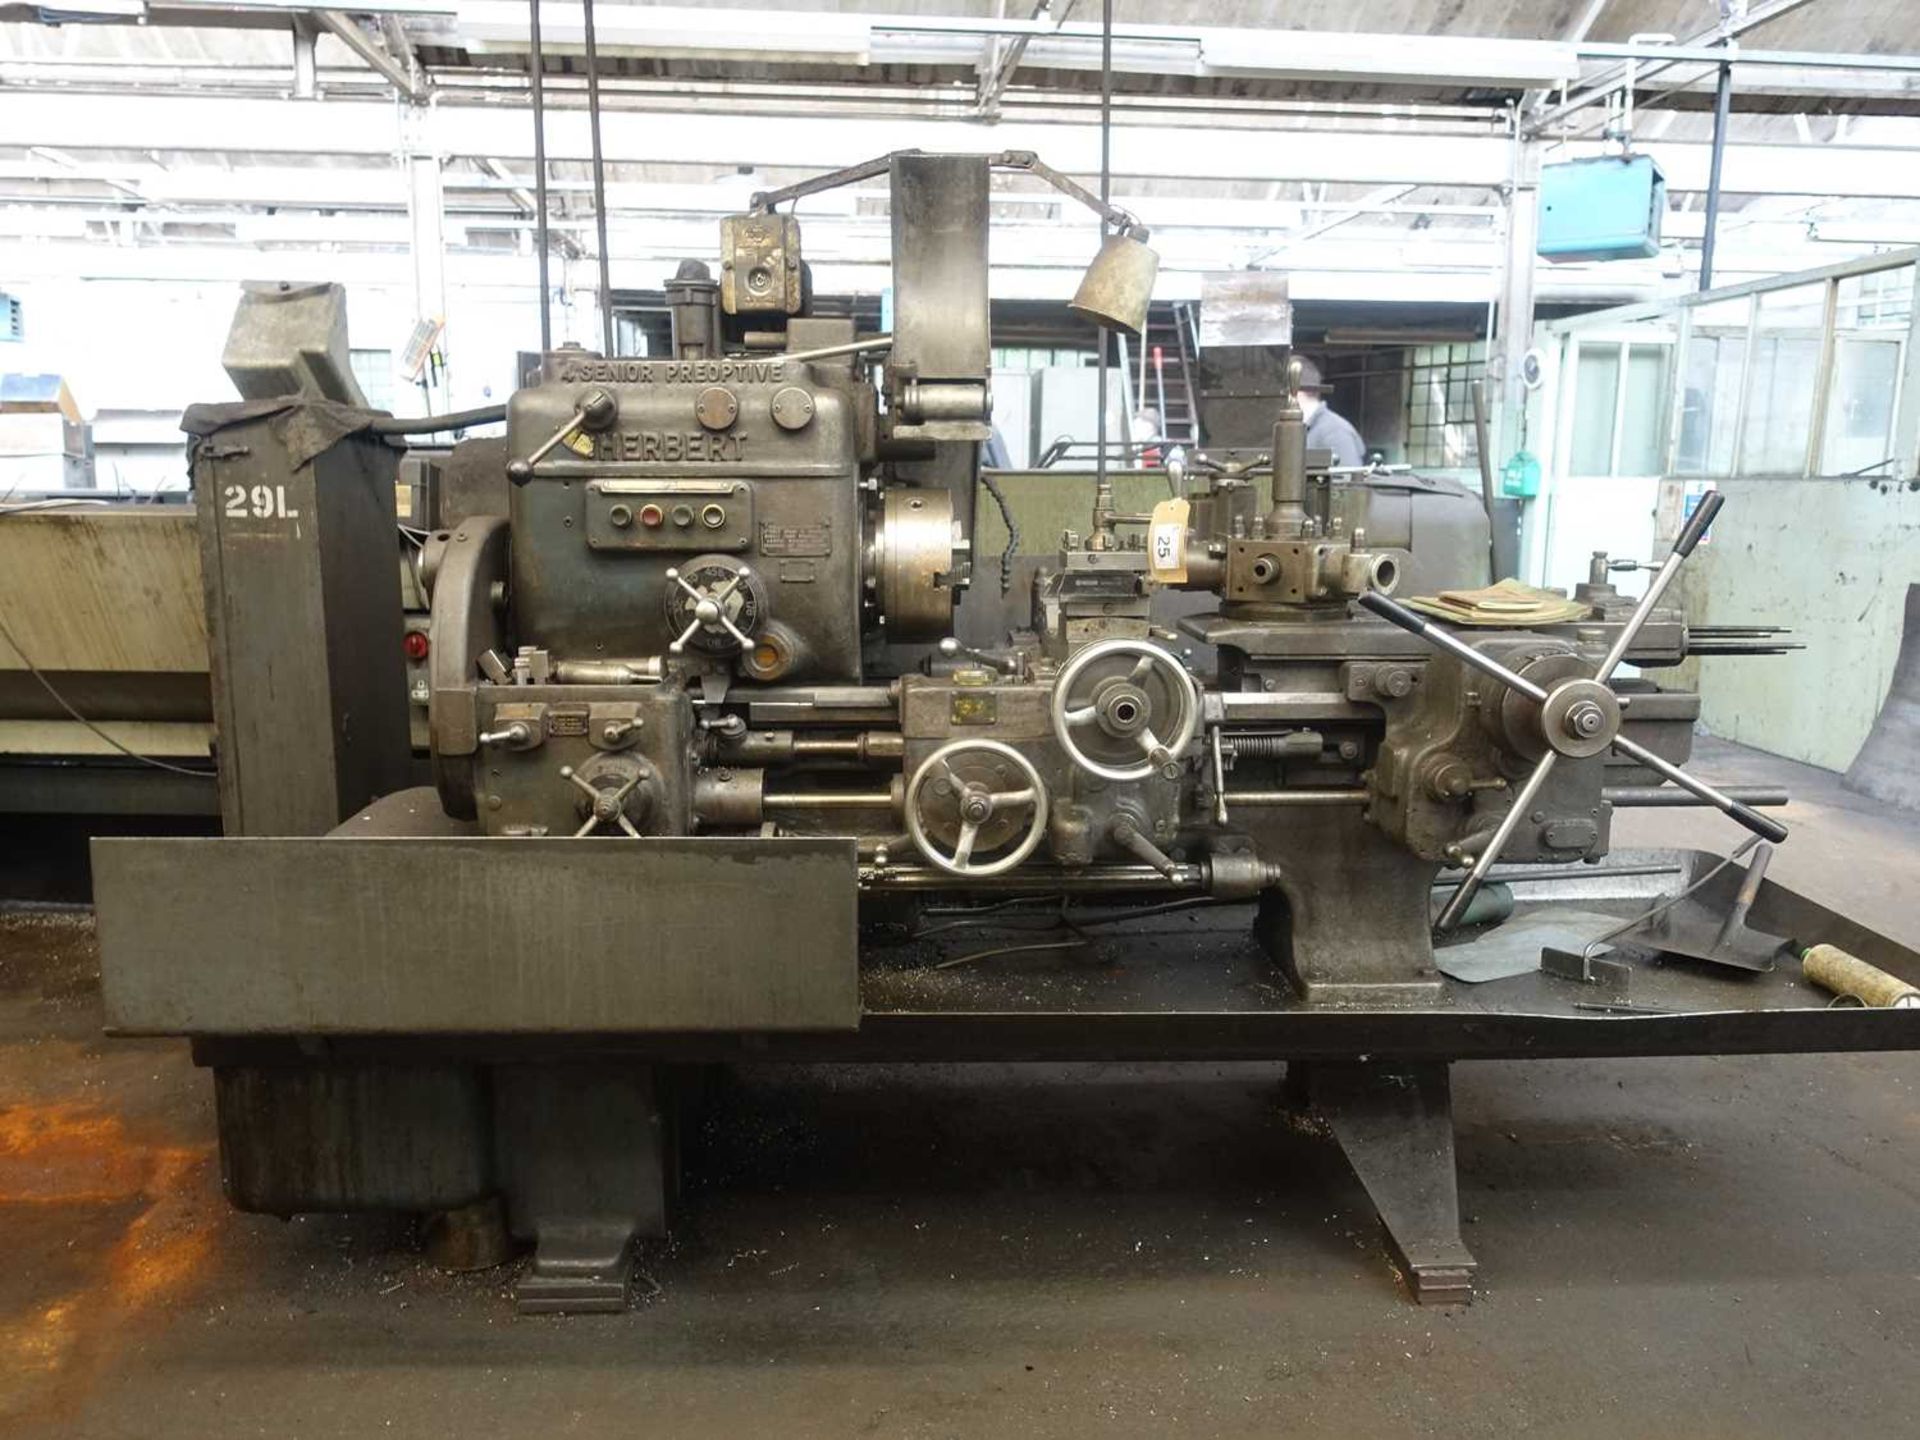 +VAT Herbert 4 Senior - Preoptive capstan lathe Important note This lot is large and may require